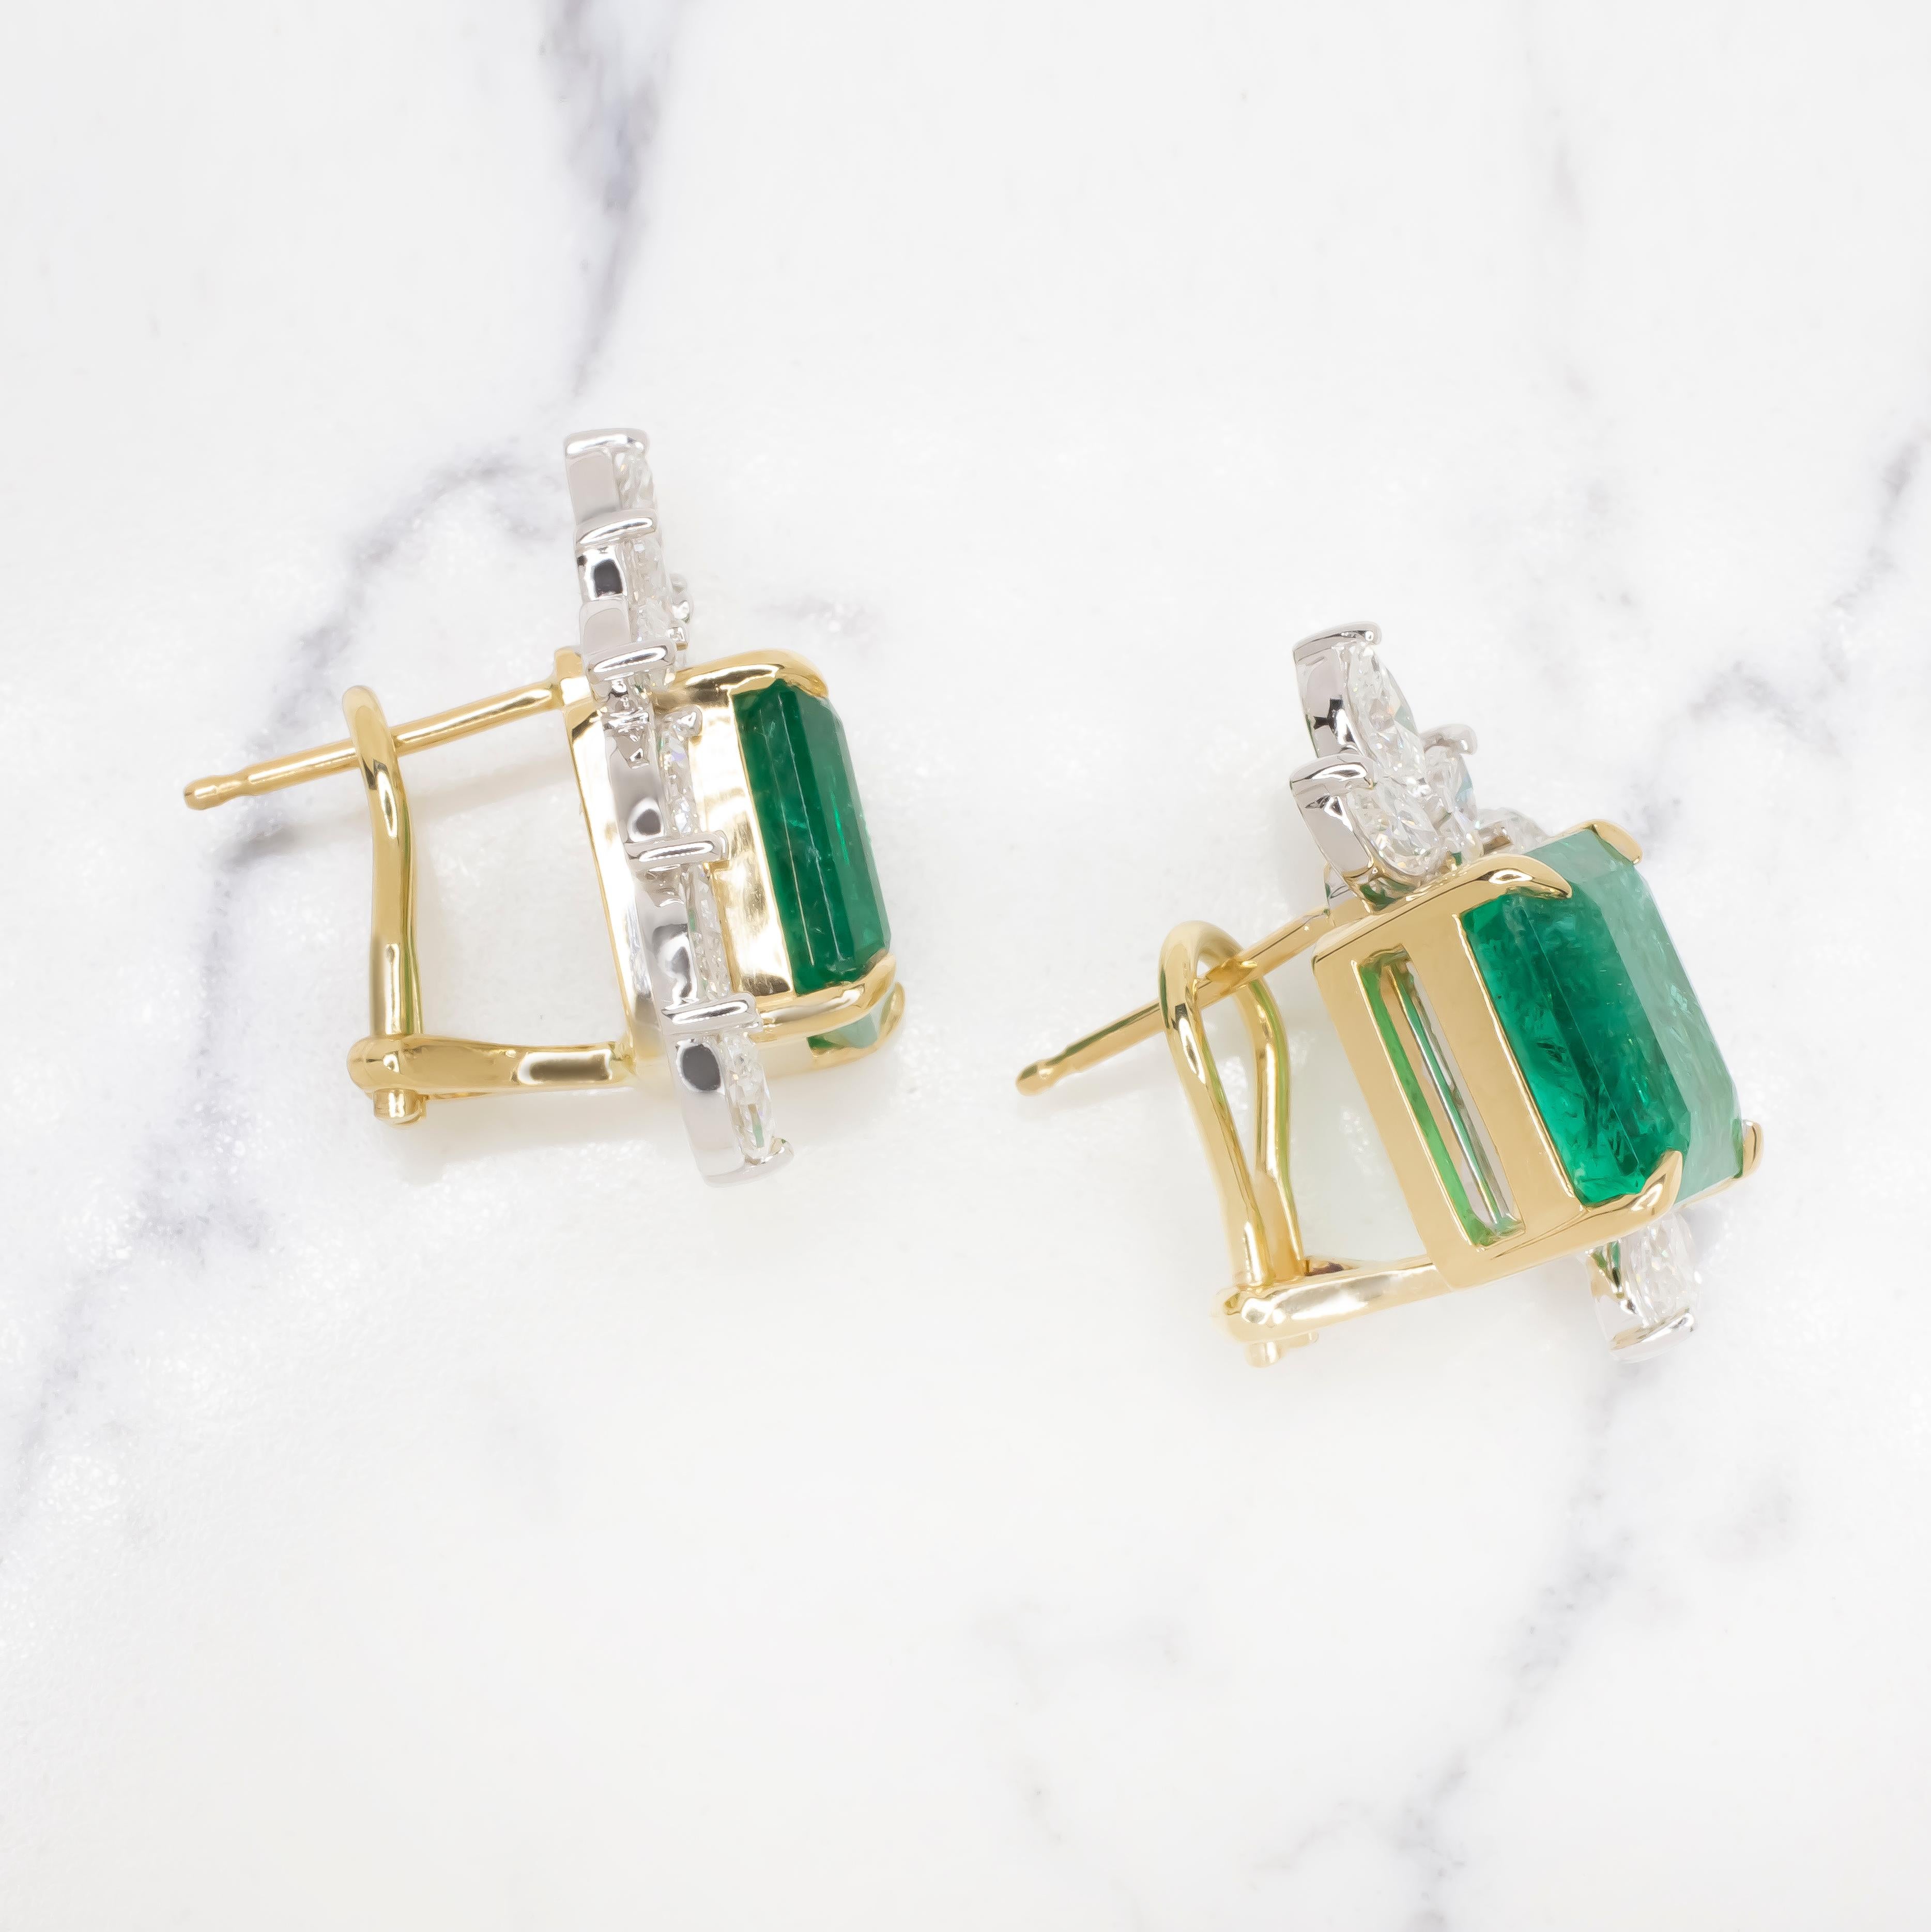 An exquisite pair of vivid green natural octagonal step cut emerald and marquise diamonds earrings
Each earring is set with an octagonal step-cut emerald, decorated with marquise-shaped diamonds.
The earrings comes with GIA and IGI certificate which